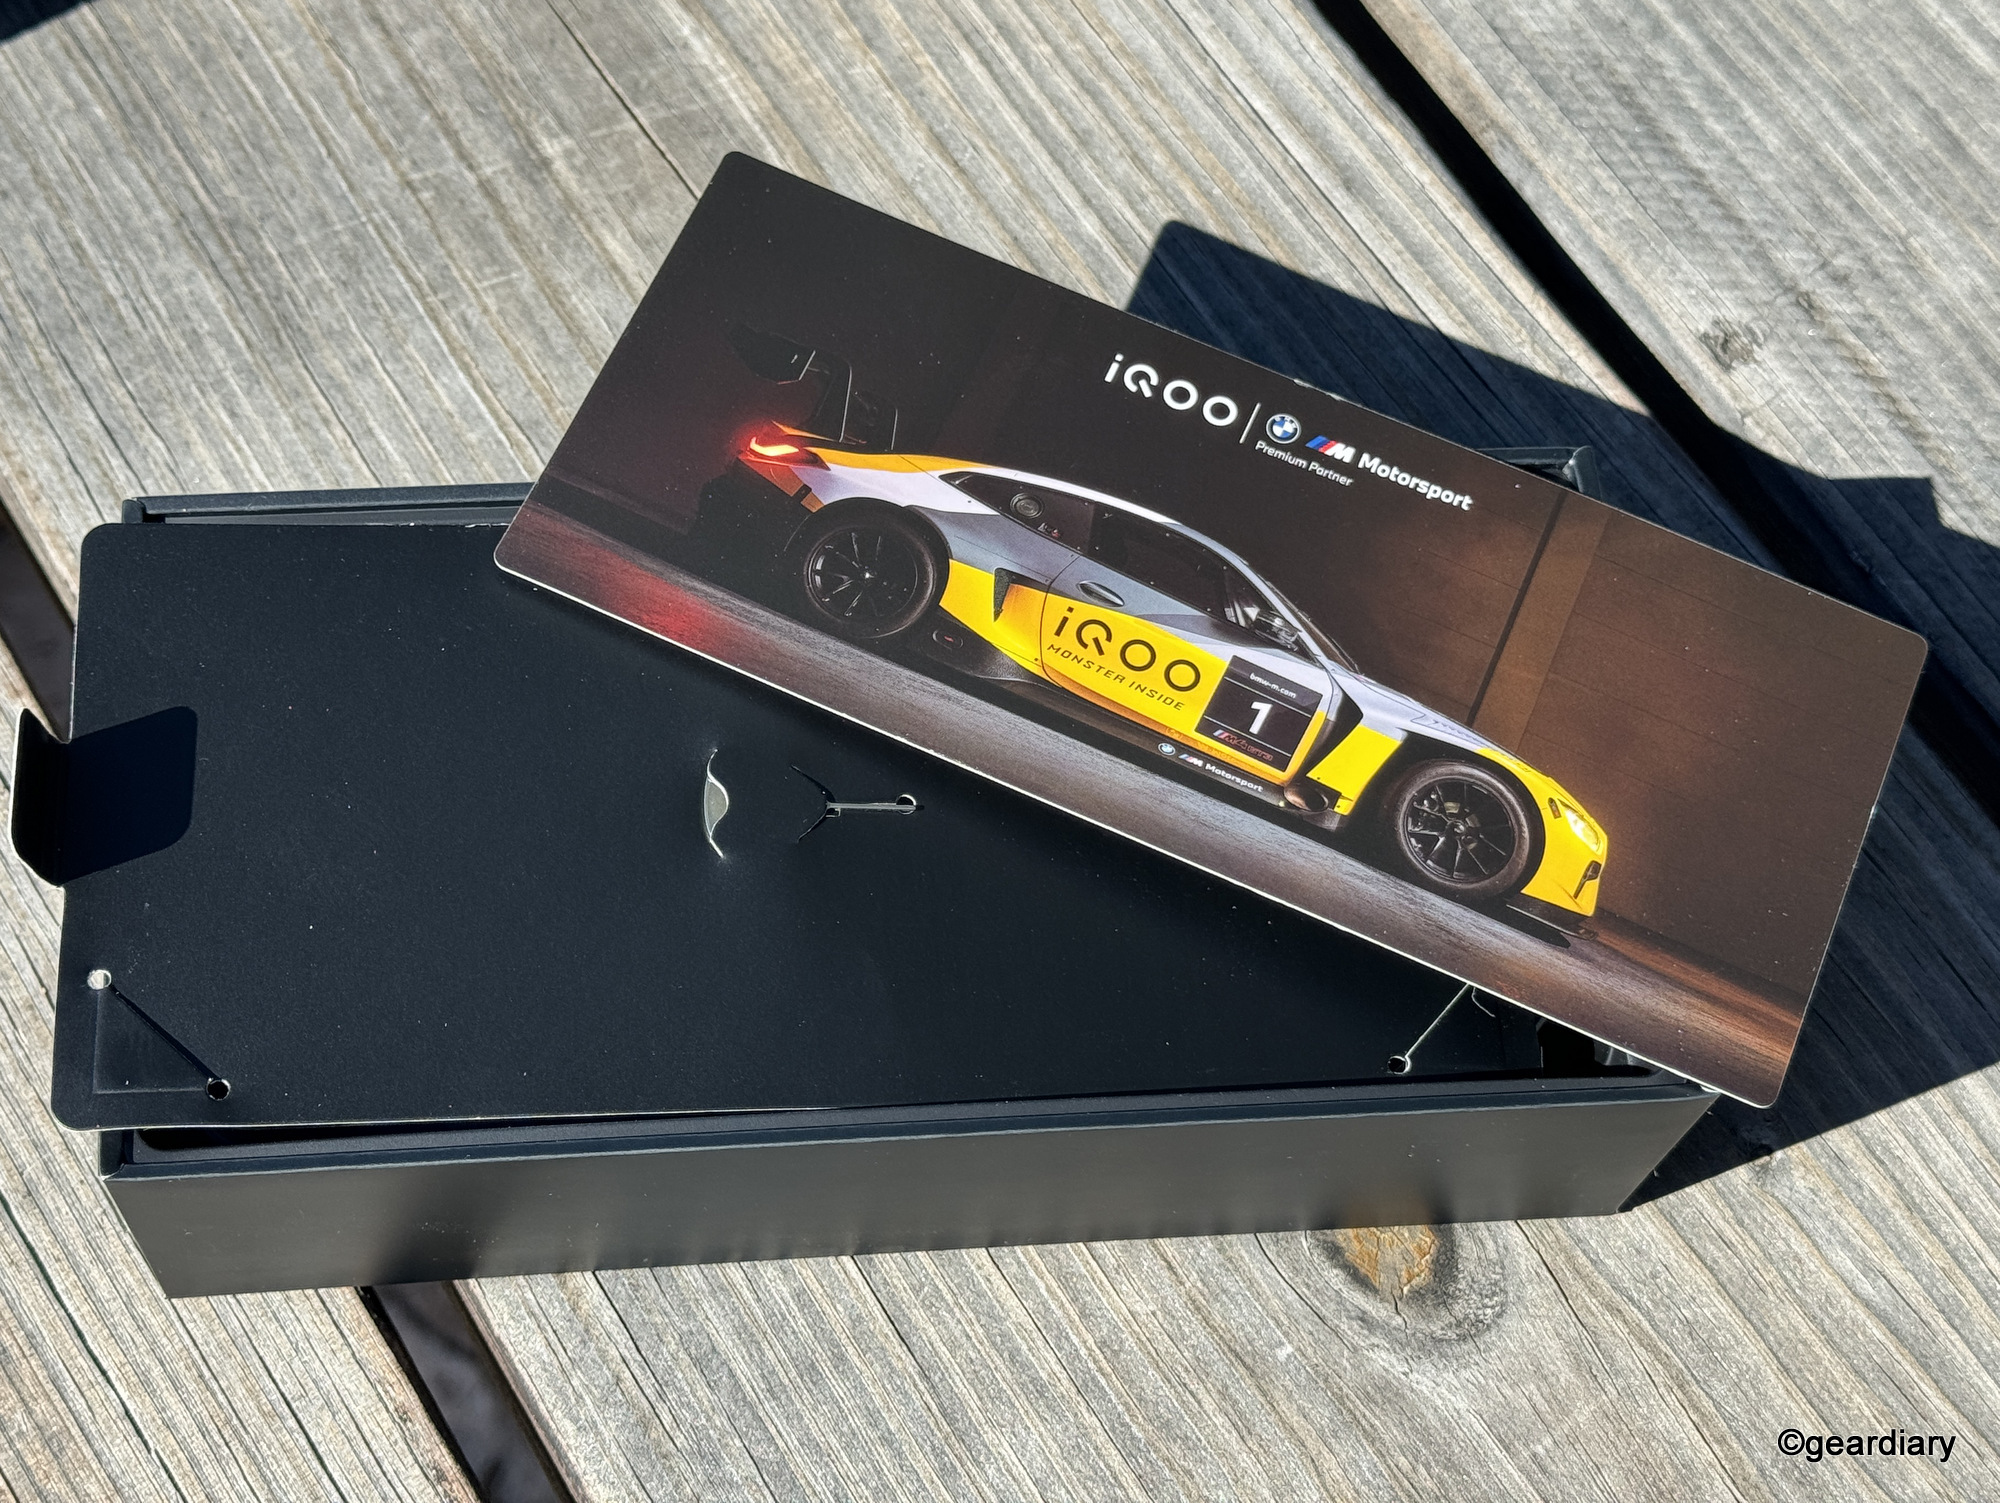 BMW insert and SIM tool in the IQOO 12 Legend Edition retail box